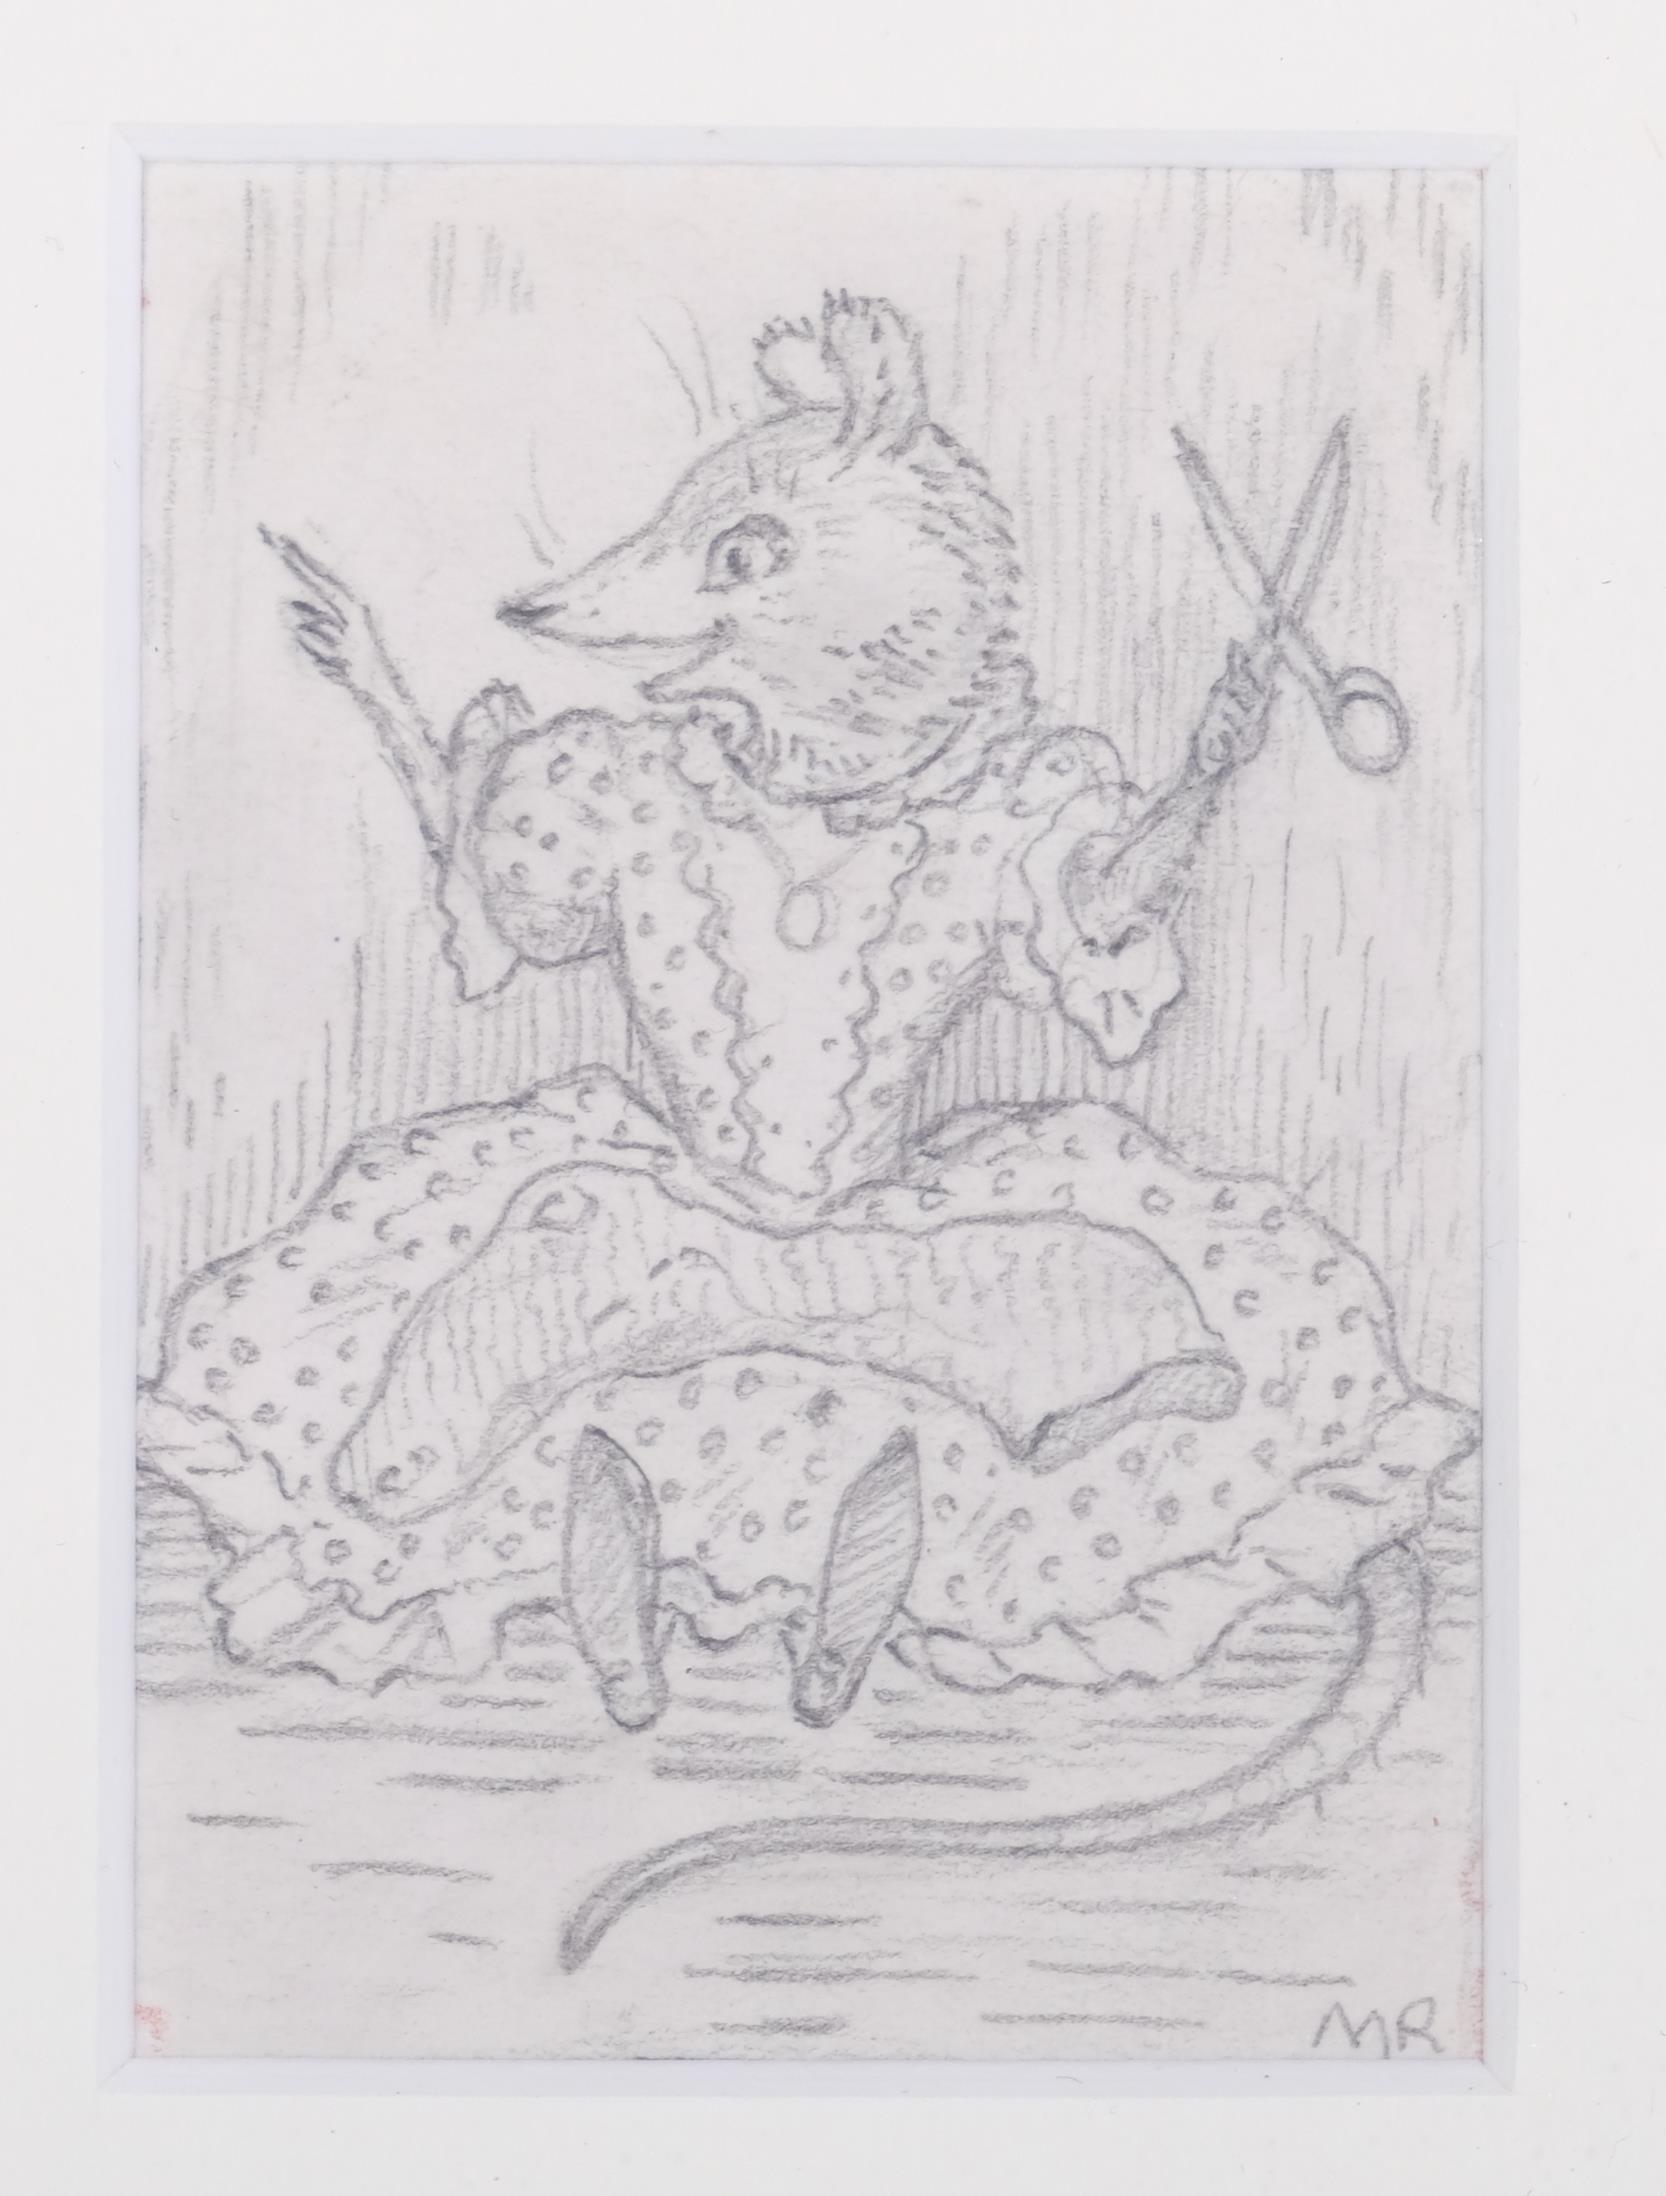 Margaret Ross, (act. 1930-50) pencil on paper, Mrs. Mouse, initialled lower right, 7cm x 5 m, - Image 3 of 4